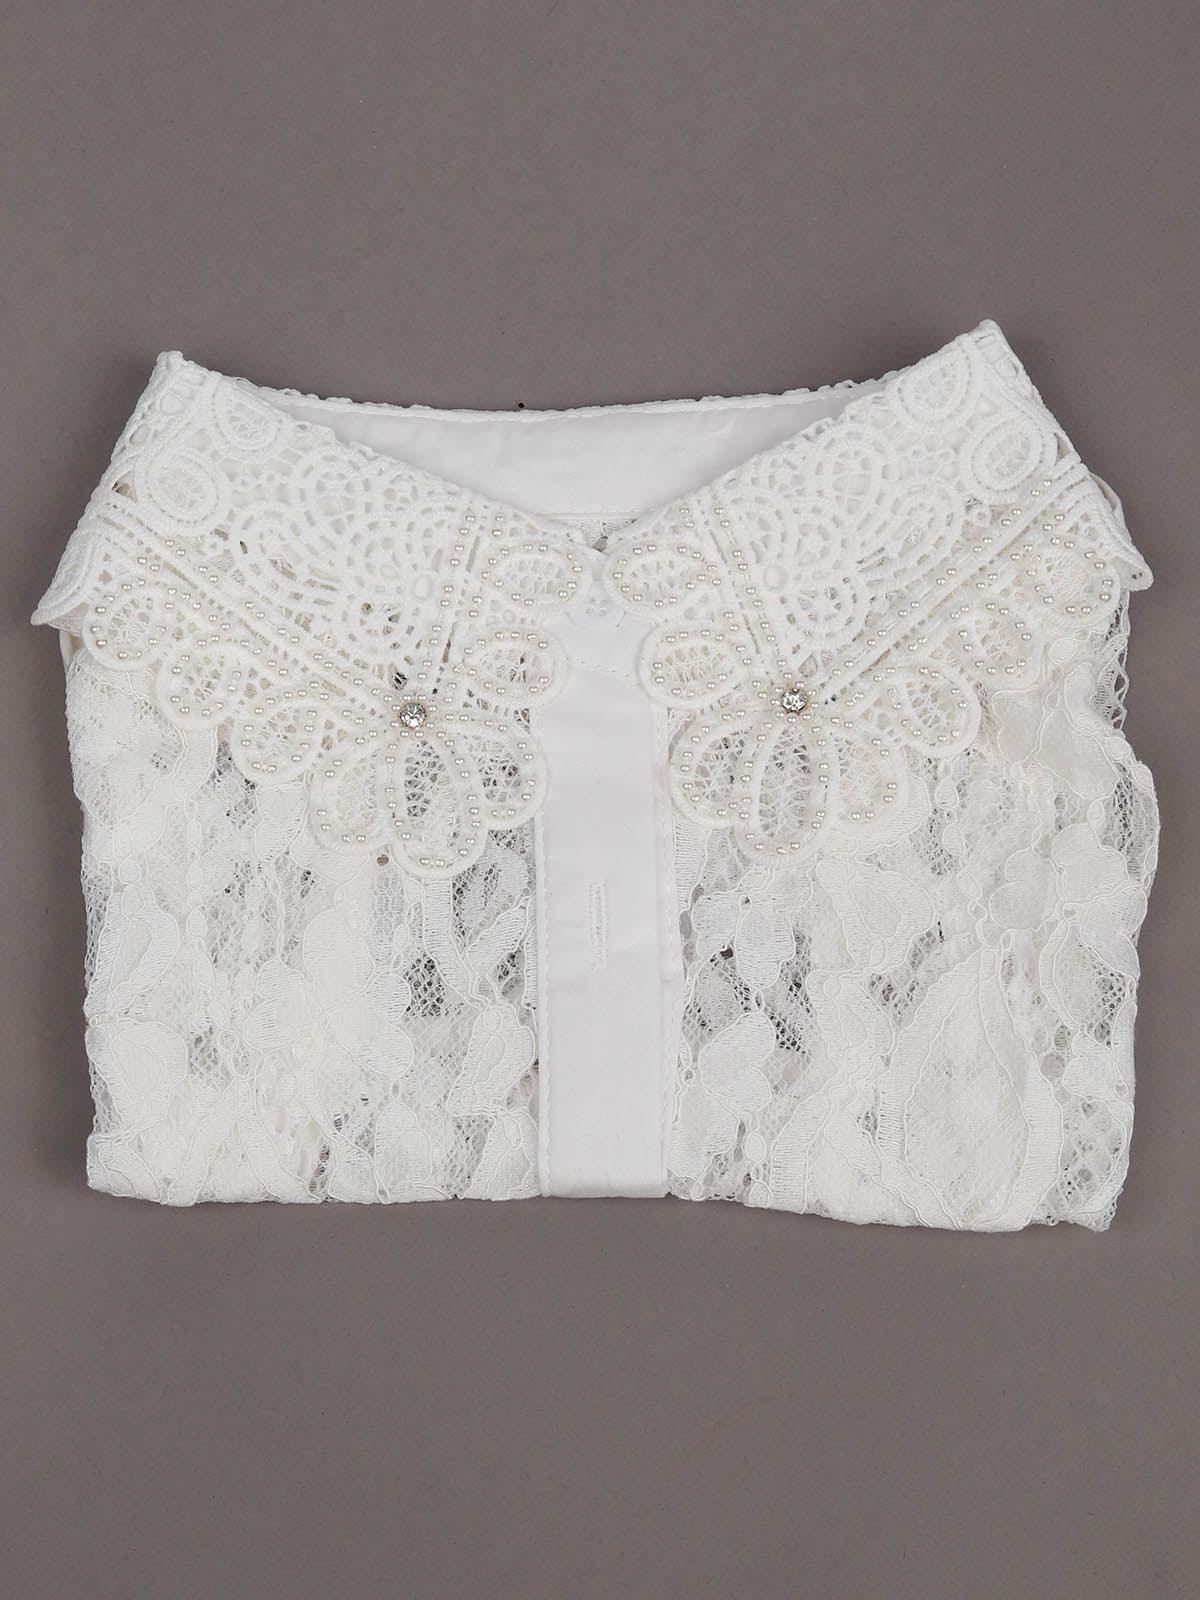 Gorgeous  white pearls embroidered collar - Odette